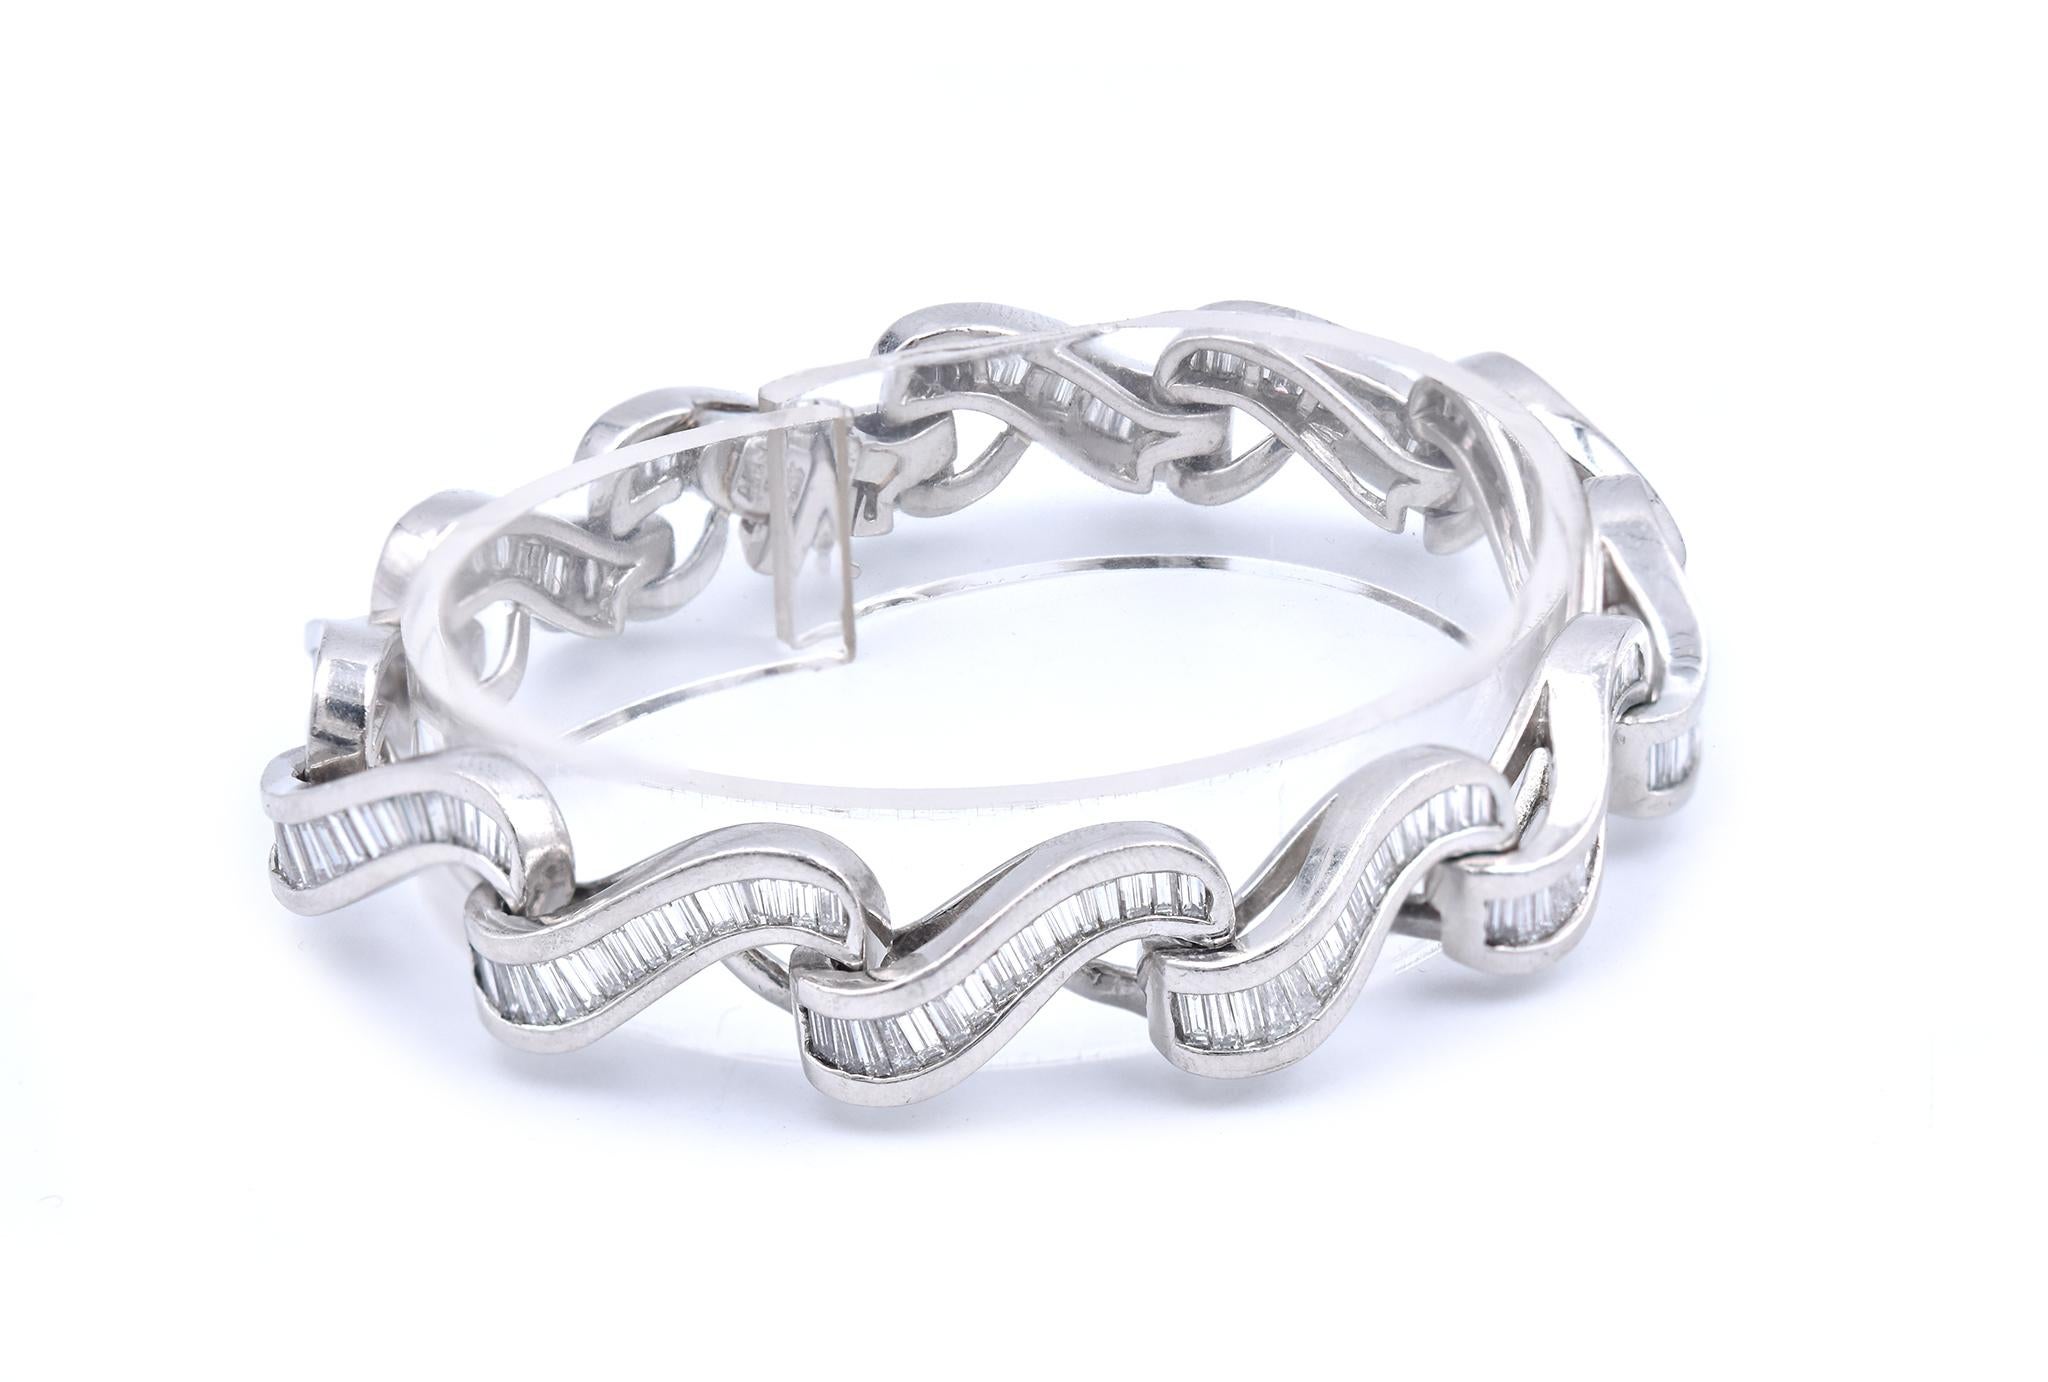 Material: platinum
Diamonds: 204 baguette cut = 6.12cttw
Color: G
Clarity: SI1-2
Dimensions: bracelet will fit up to a 7-inch wrist
Weight: 61.28 grams